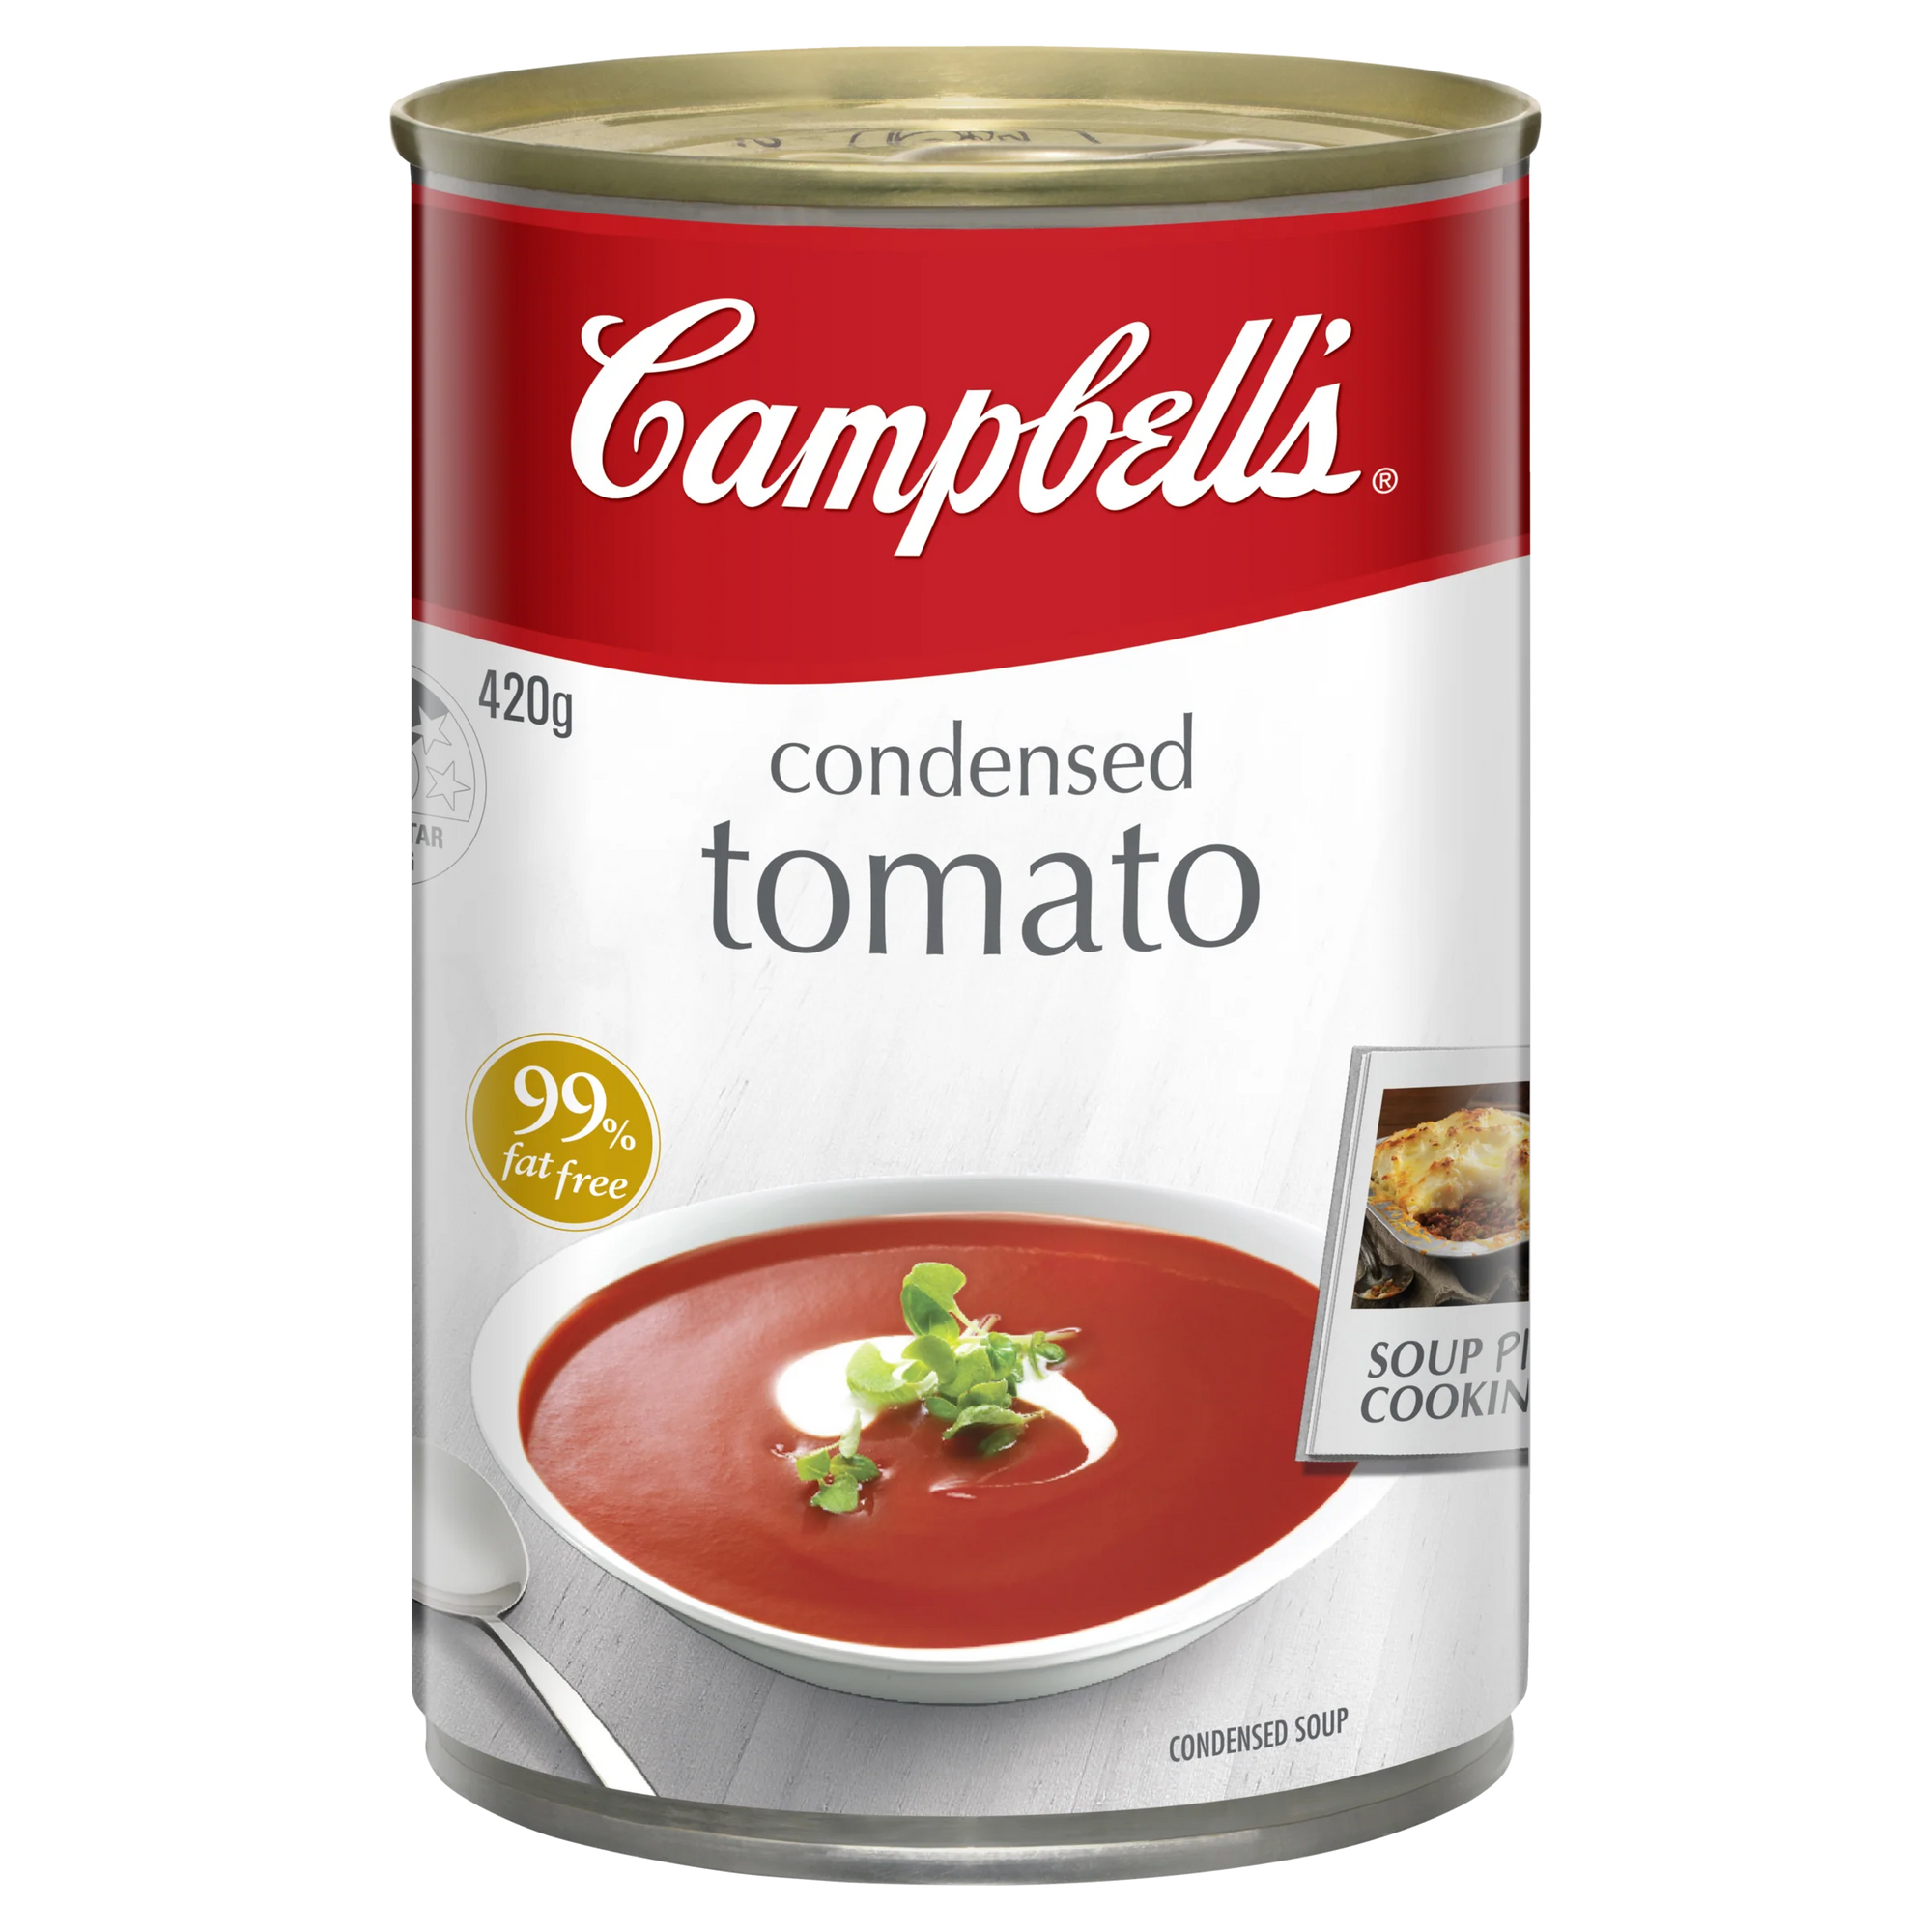 Campbells Condensed Tomato Soup 420g